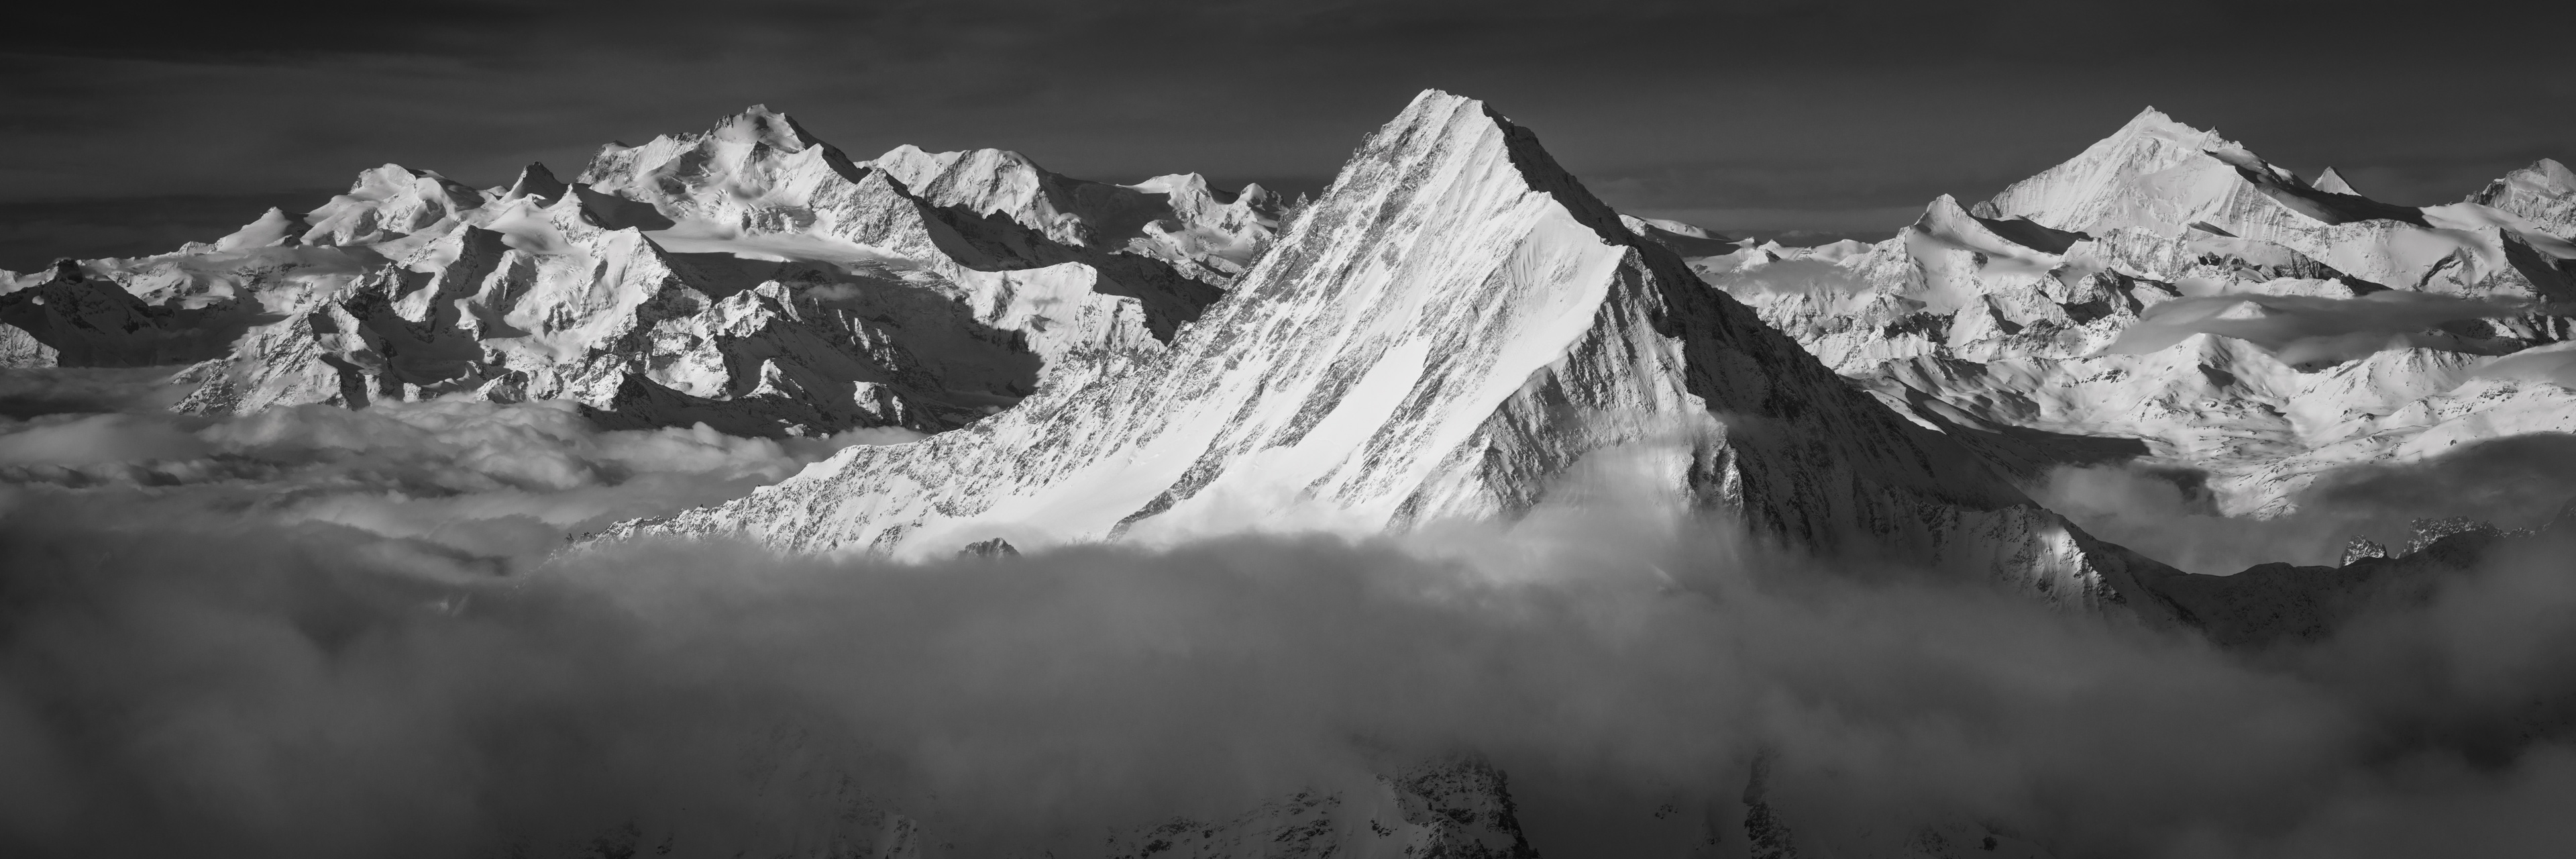 Panoramic moutain image prints of Swiss Valais Alps panorama - Bietschorn - Michabels - Weisshorn